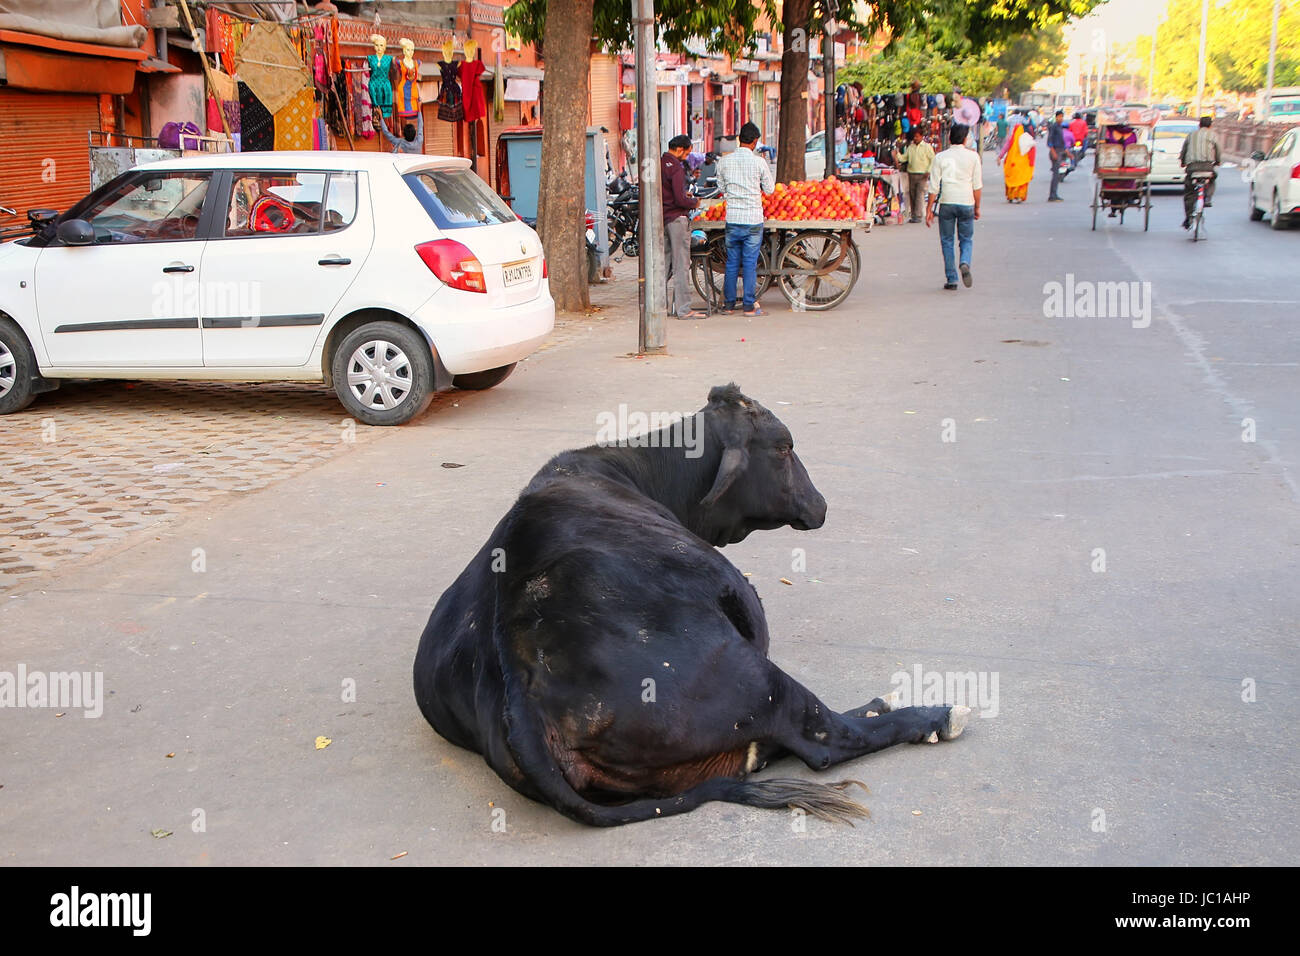 Black cow lying at Johari Bazzar Street in Jaipur, Rajasthan, India. Cattle is considered sacred in Hinduism. Stock Photo